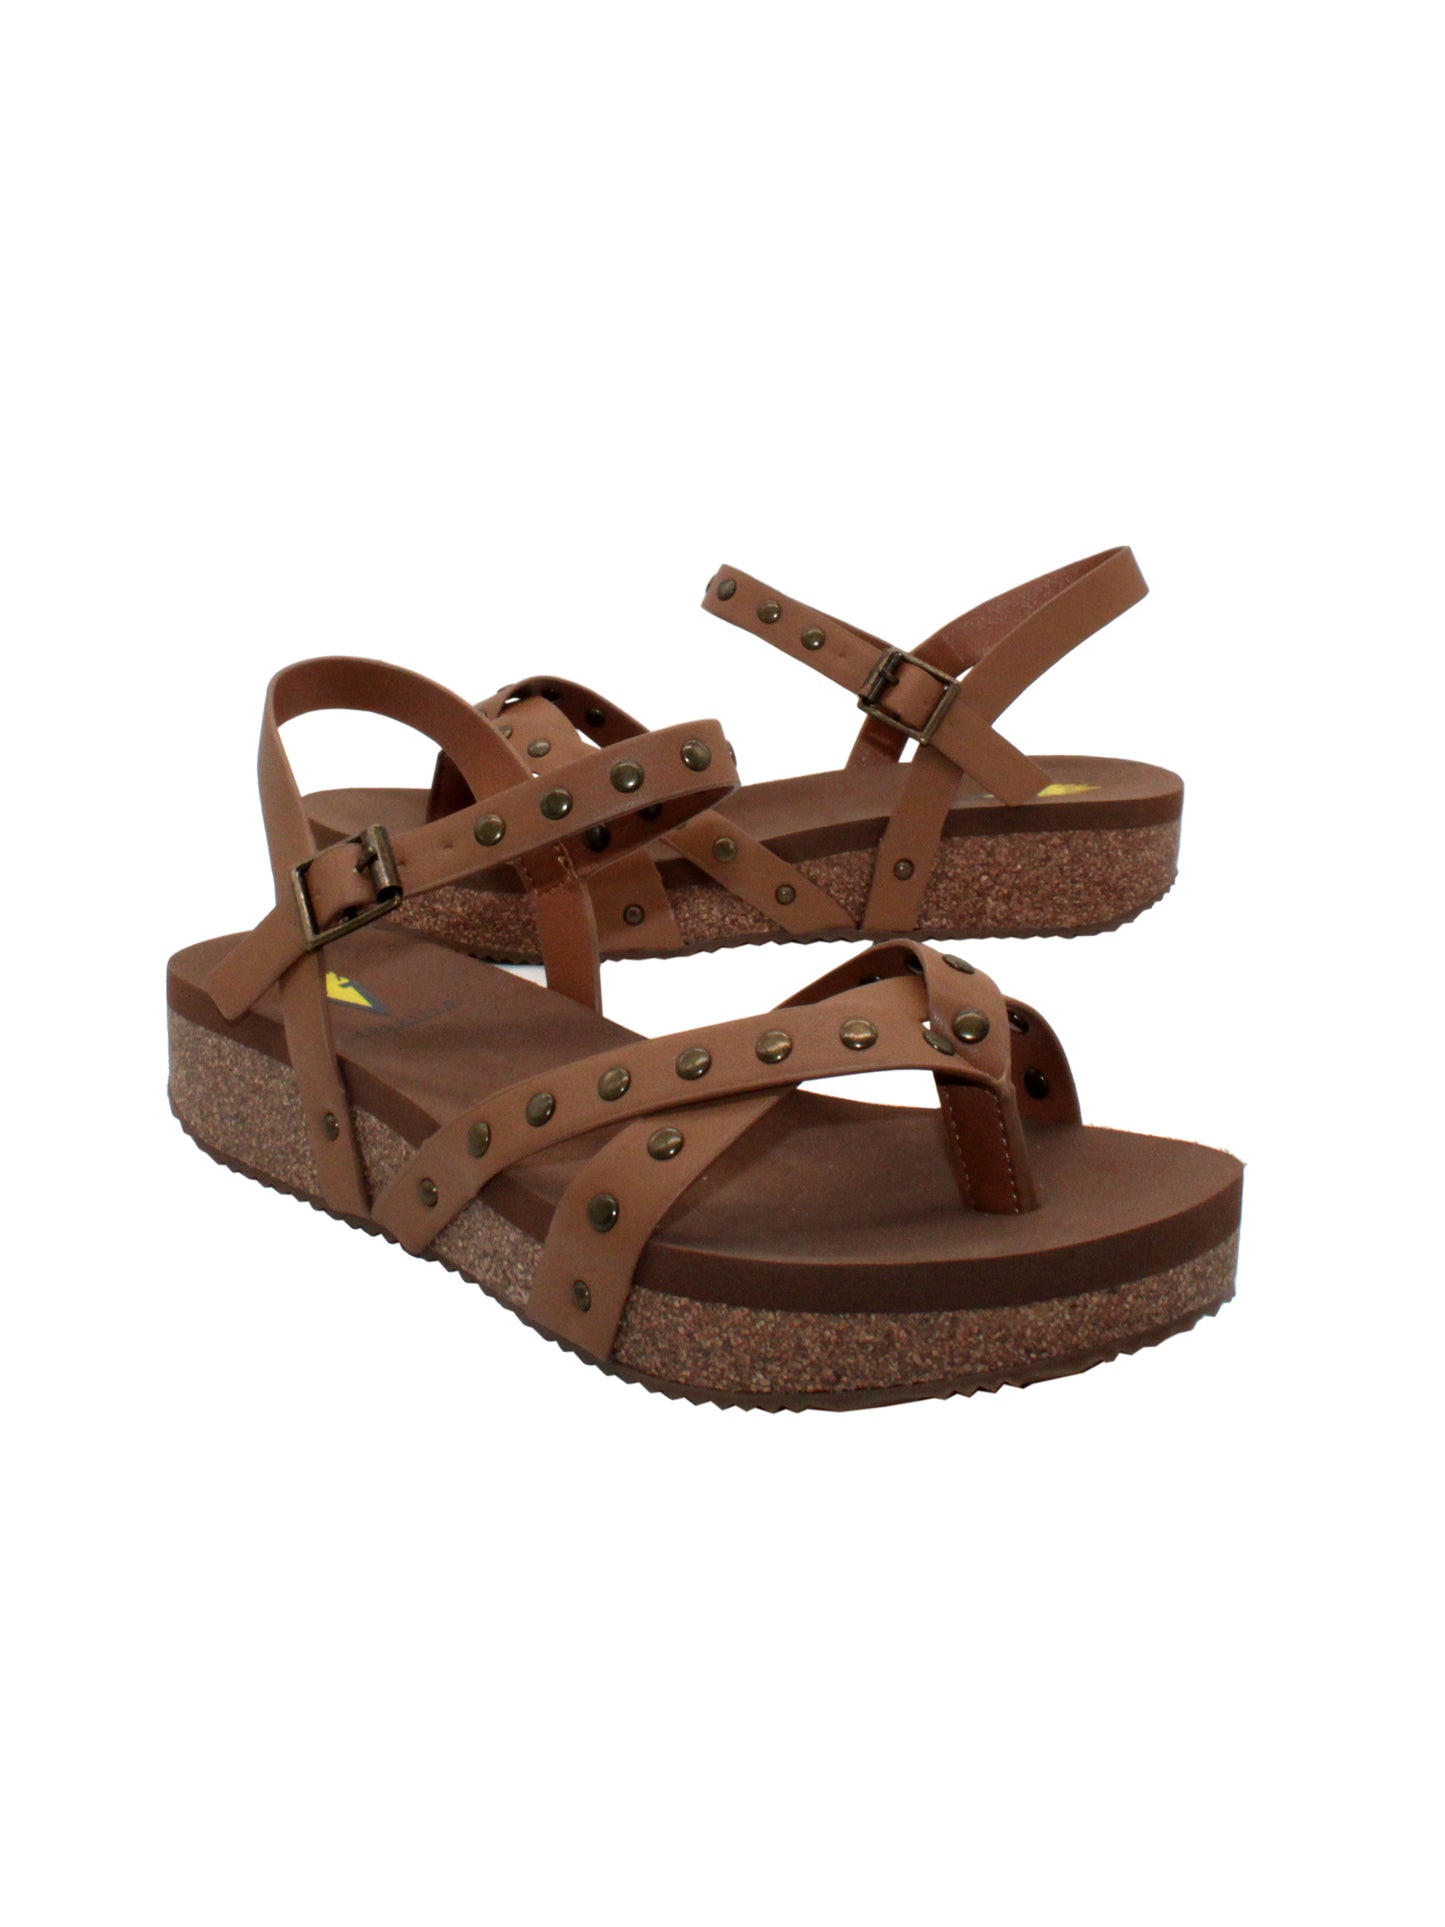  Volatile's Kelton sandal in a vegan leather is our warm weather staple. The low platform wedge adds a subtle lift while offering stability, perfect for dressing up weekend wear or keeping fashionably comfortable at the next outdoor party. Style them with everything, from shorts to dresses, and more. tan  2